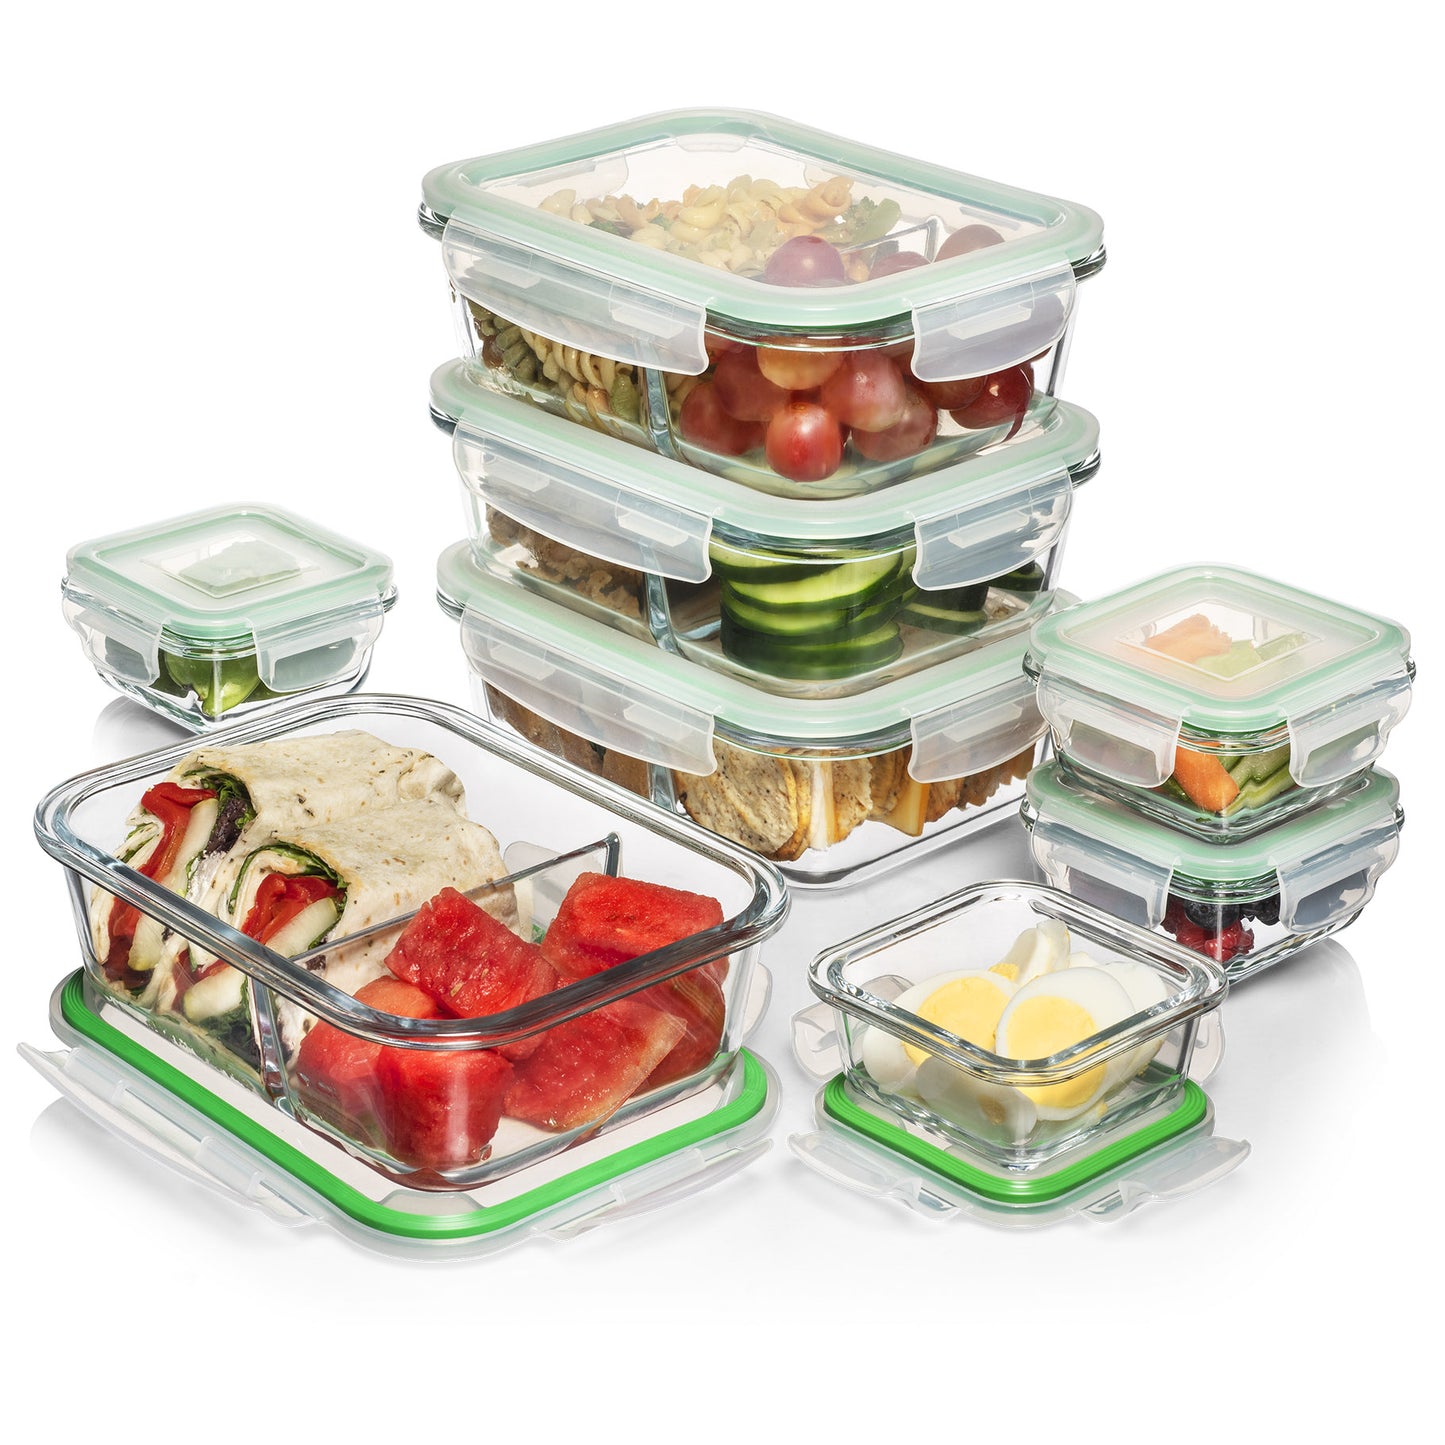 Reusable Glass Meal Prep Container Set, Glass Food Containers with Lids, Lunch Storage with Compartment Dividers, Large Glass Bento Box Set for Meal